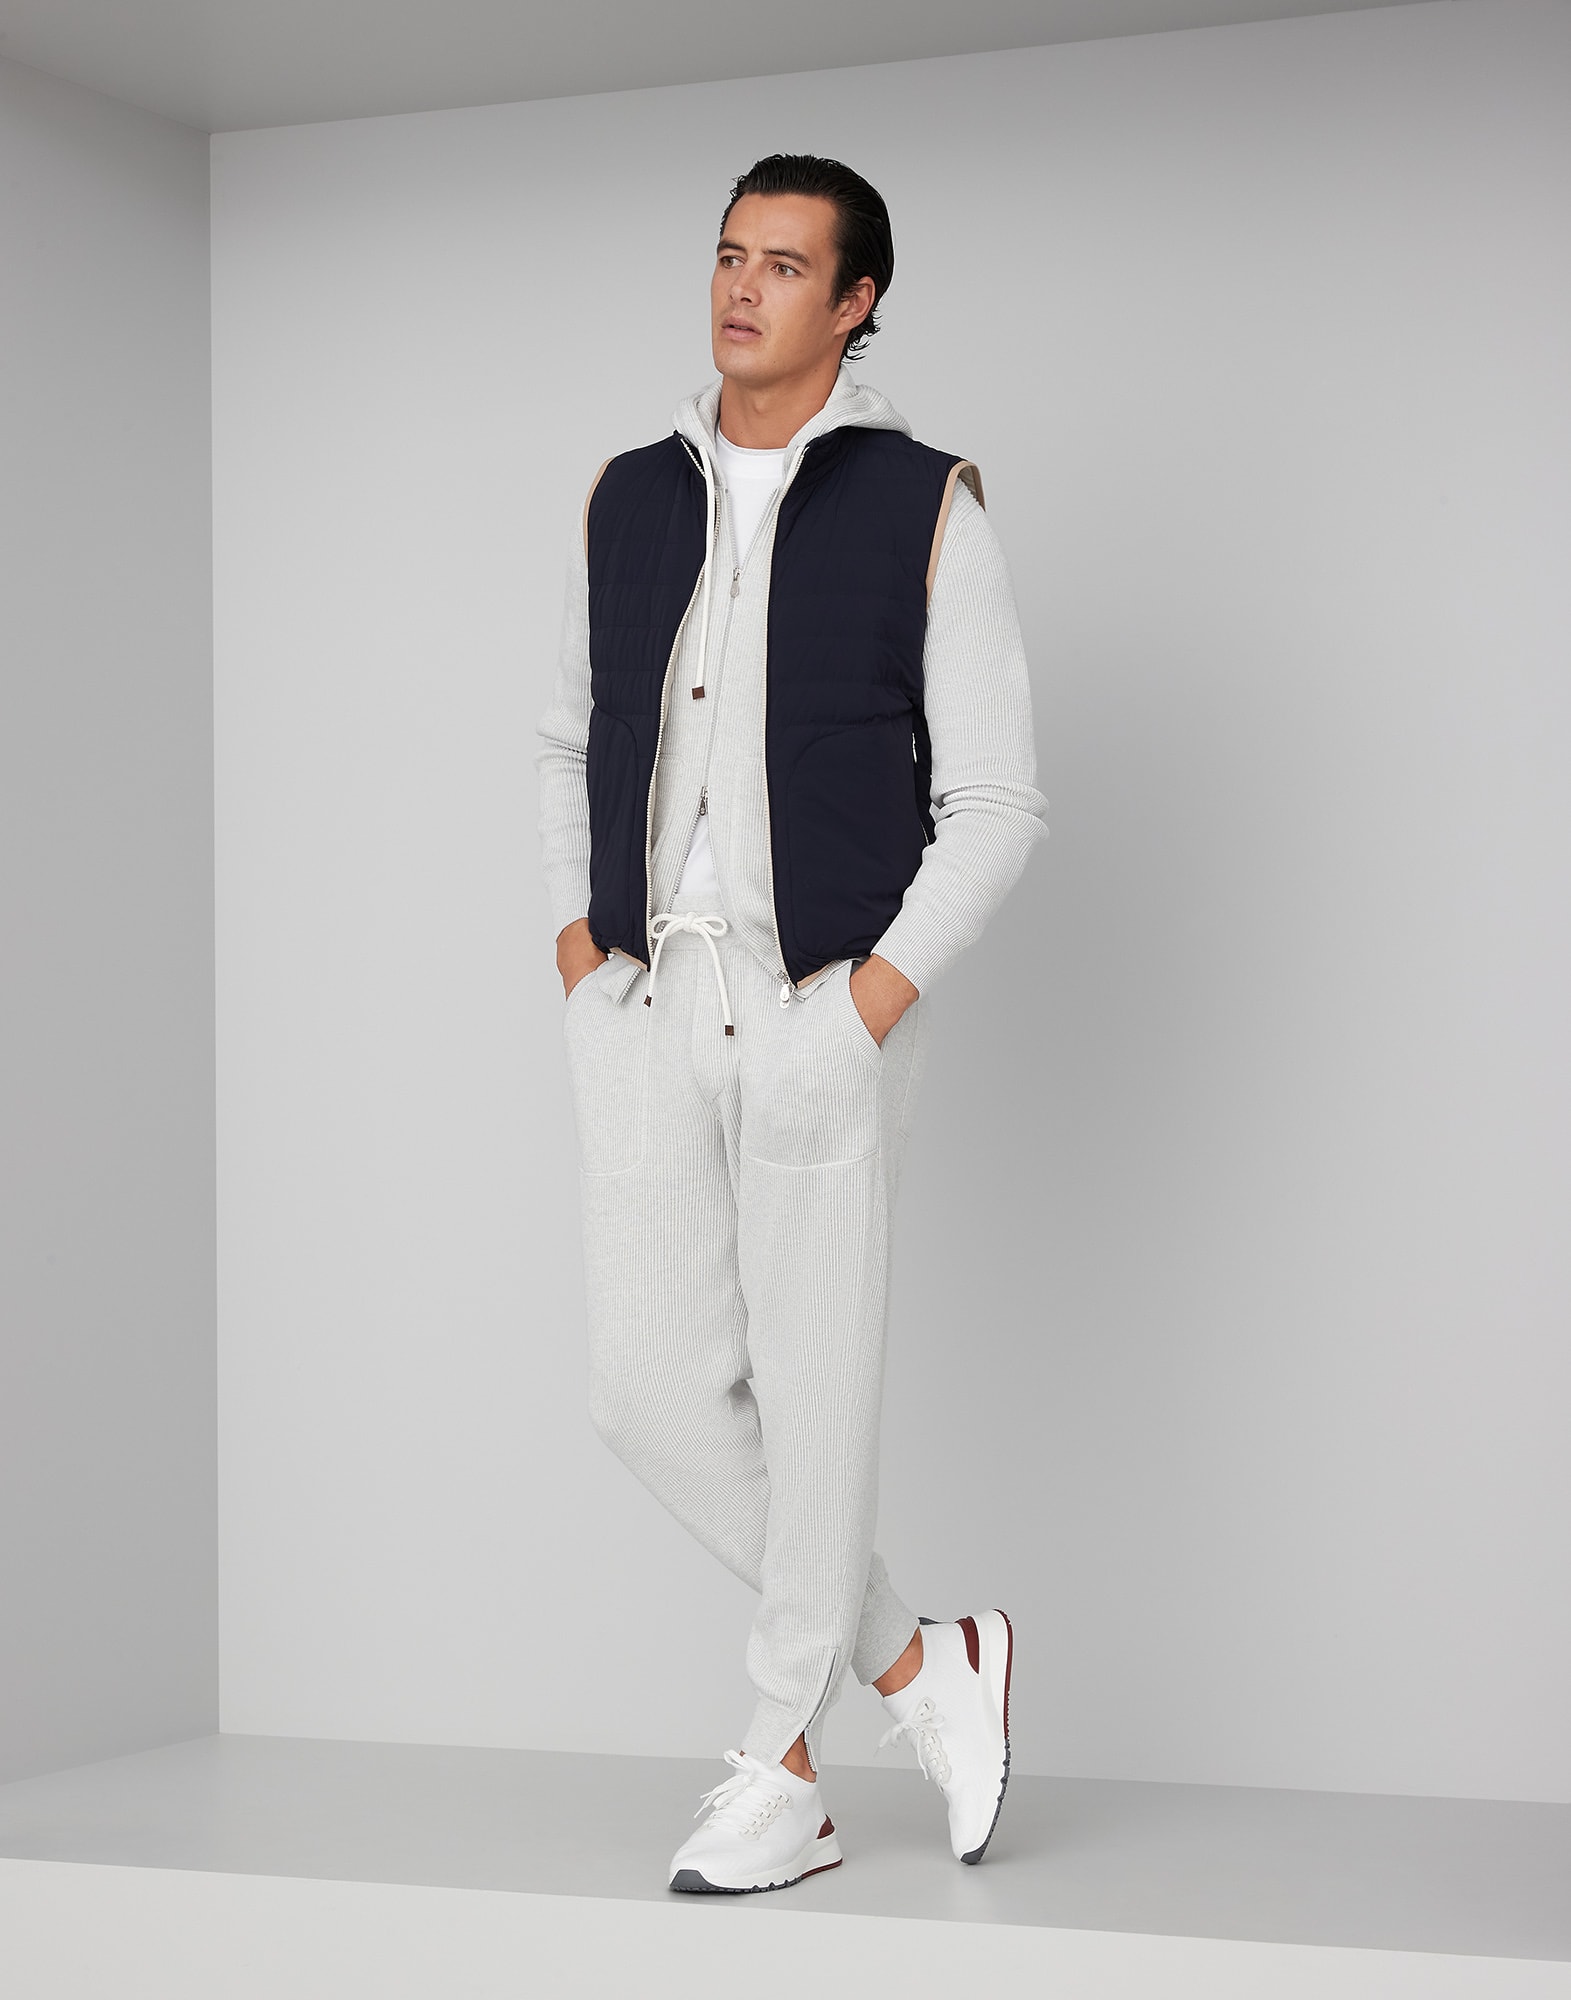 Saks Just Launched an Exclusive Brunello Cucinelli Men's Sports-Essential  Capsule